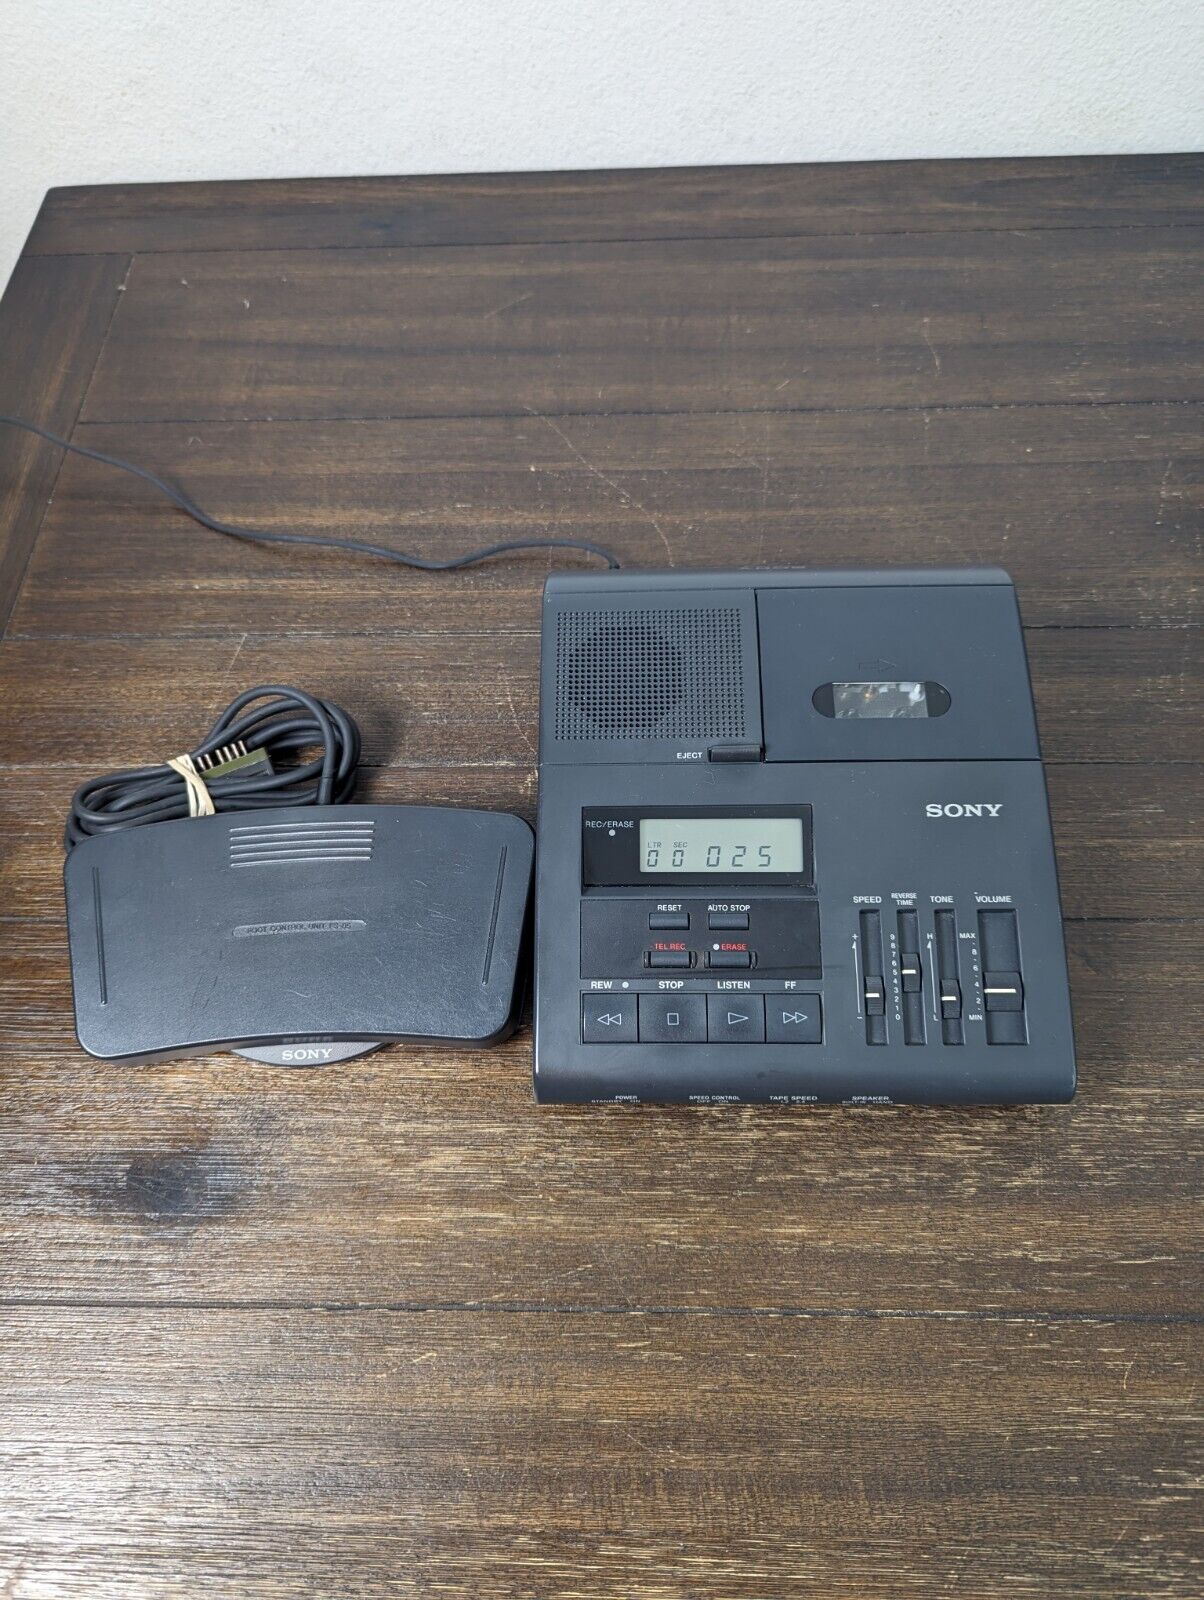 Sony BM-850 Dictator Transcriber Microcassette Player w/ Foot Control AC Adapter